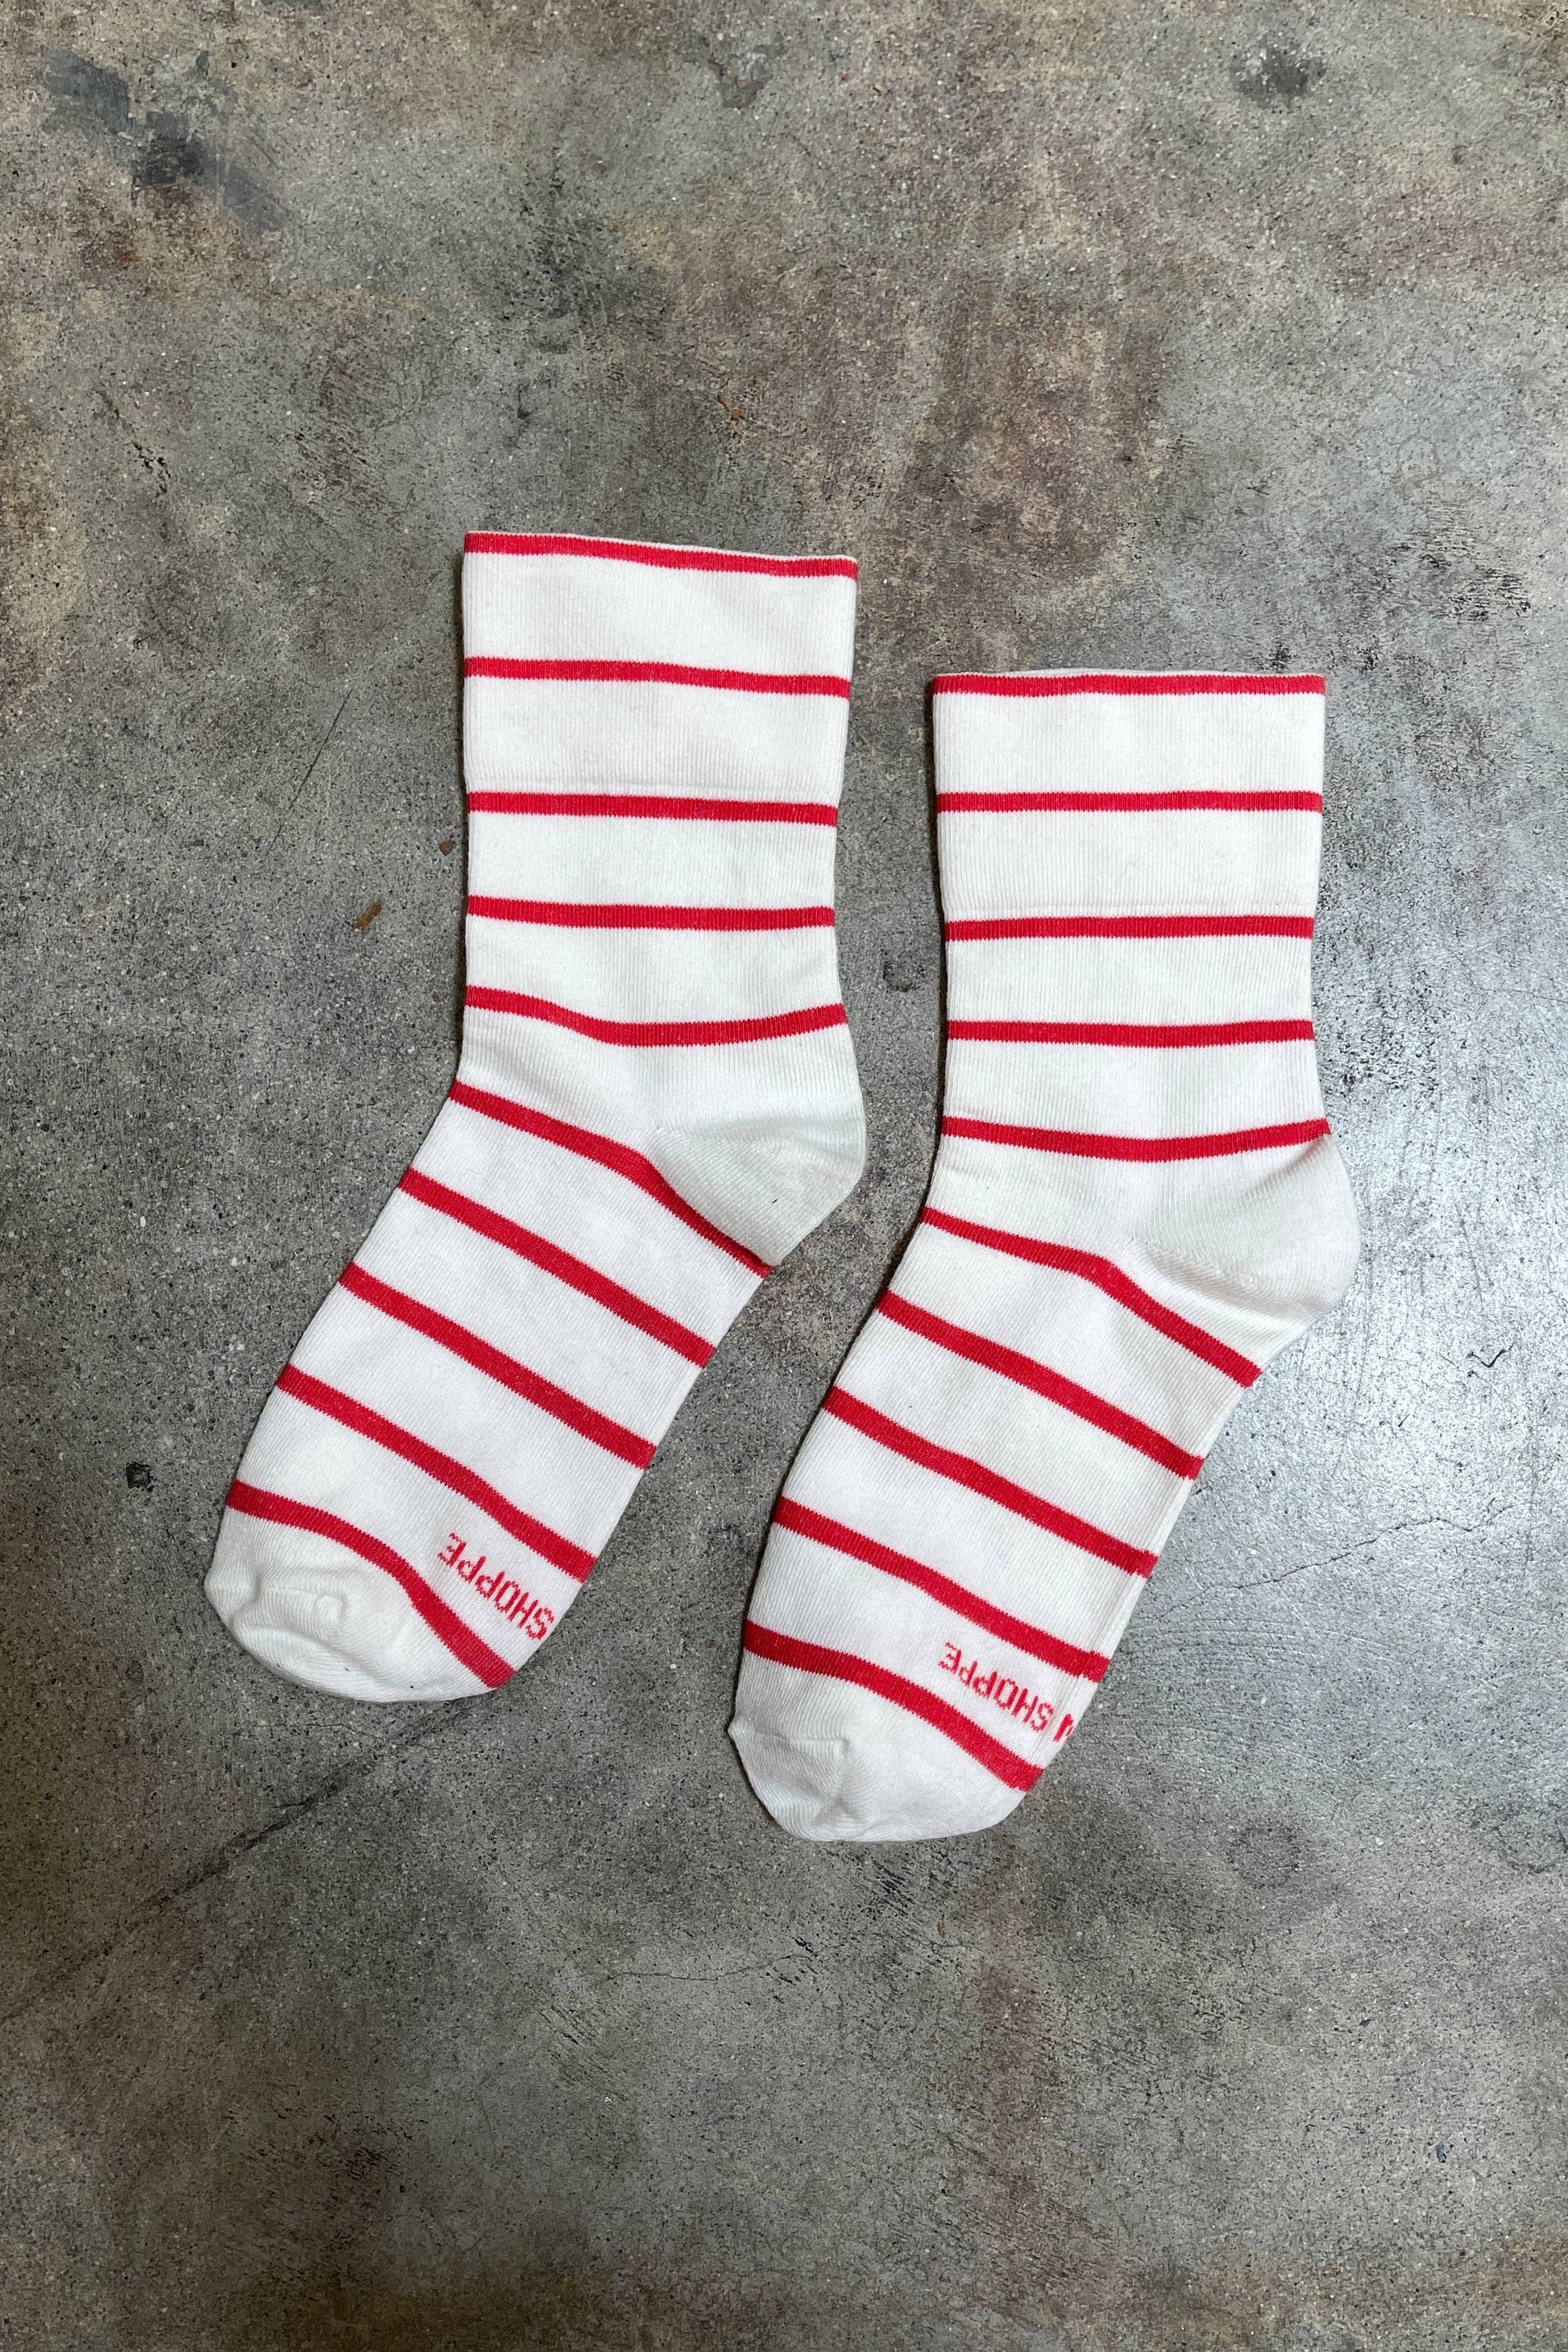 Wally Socks: Candy Cane - The Crowd Went Wild